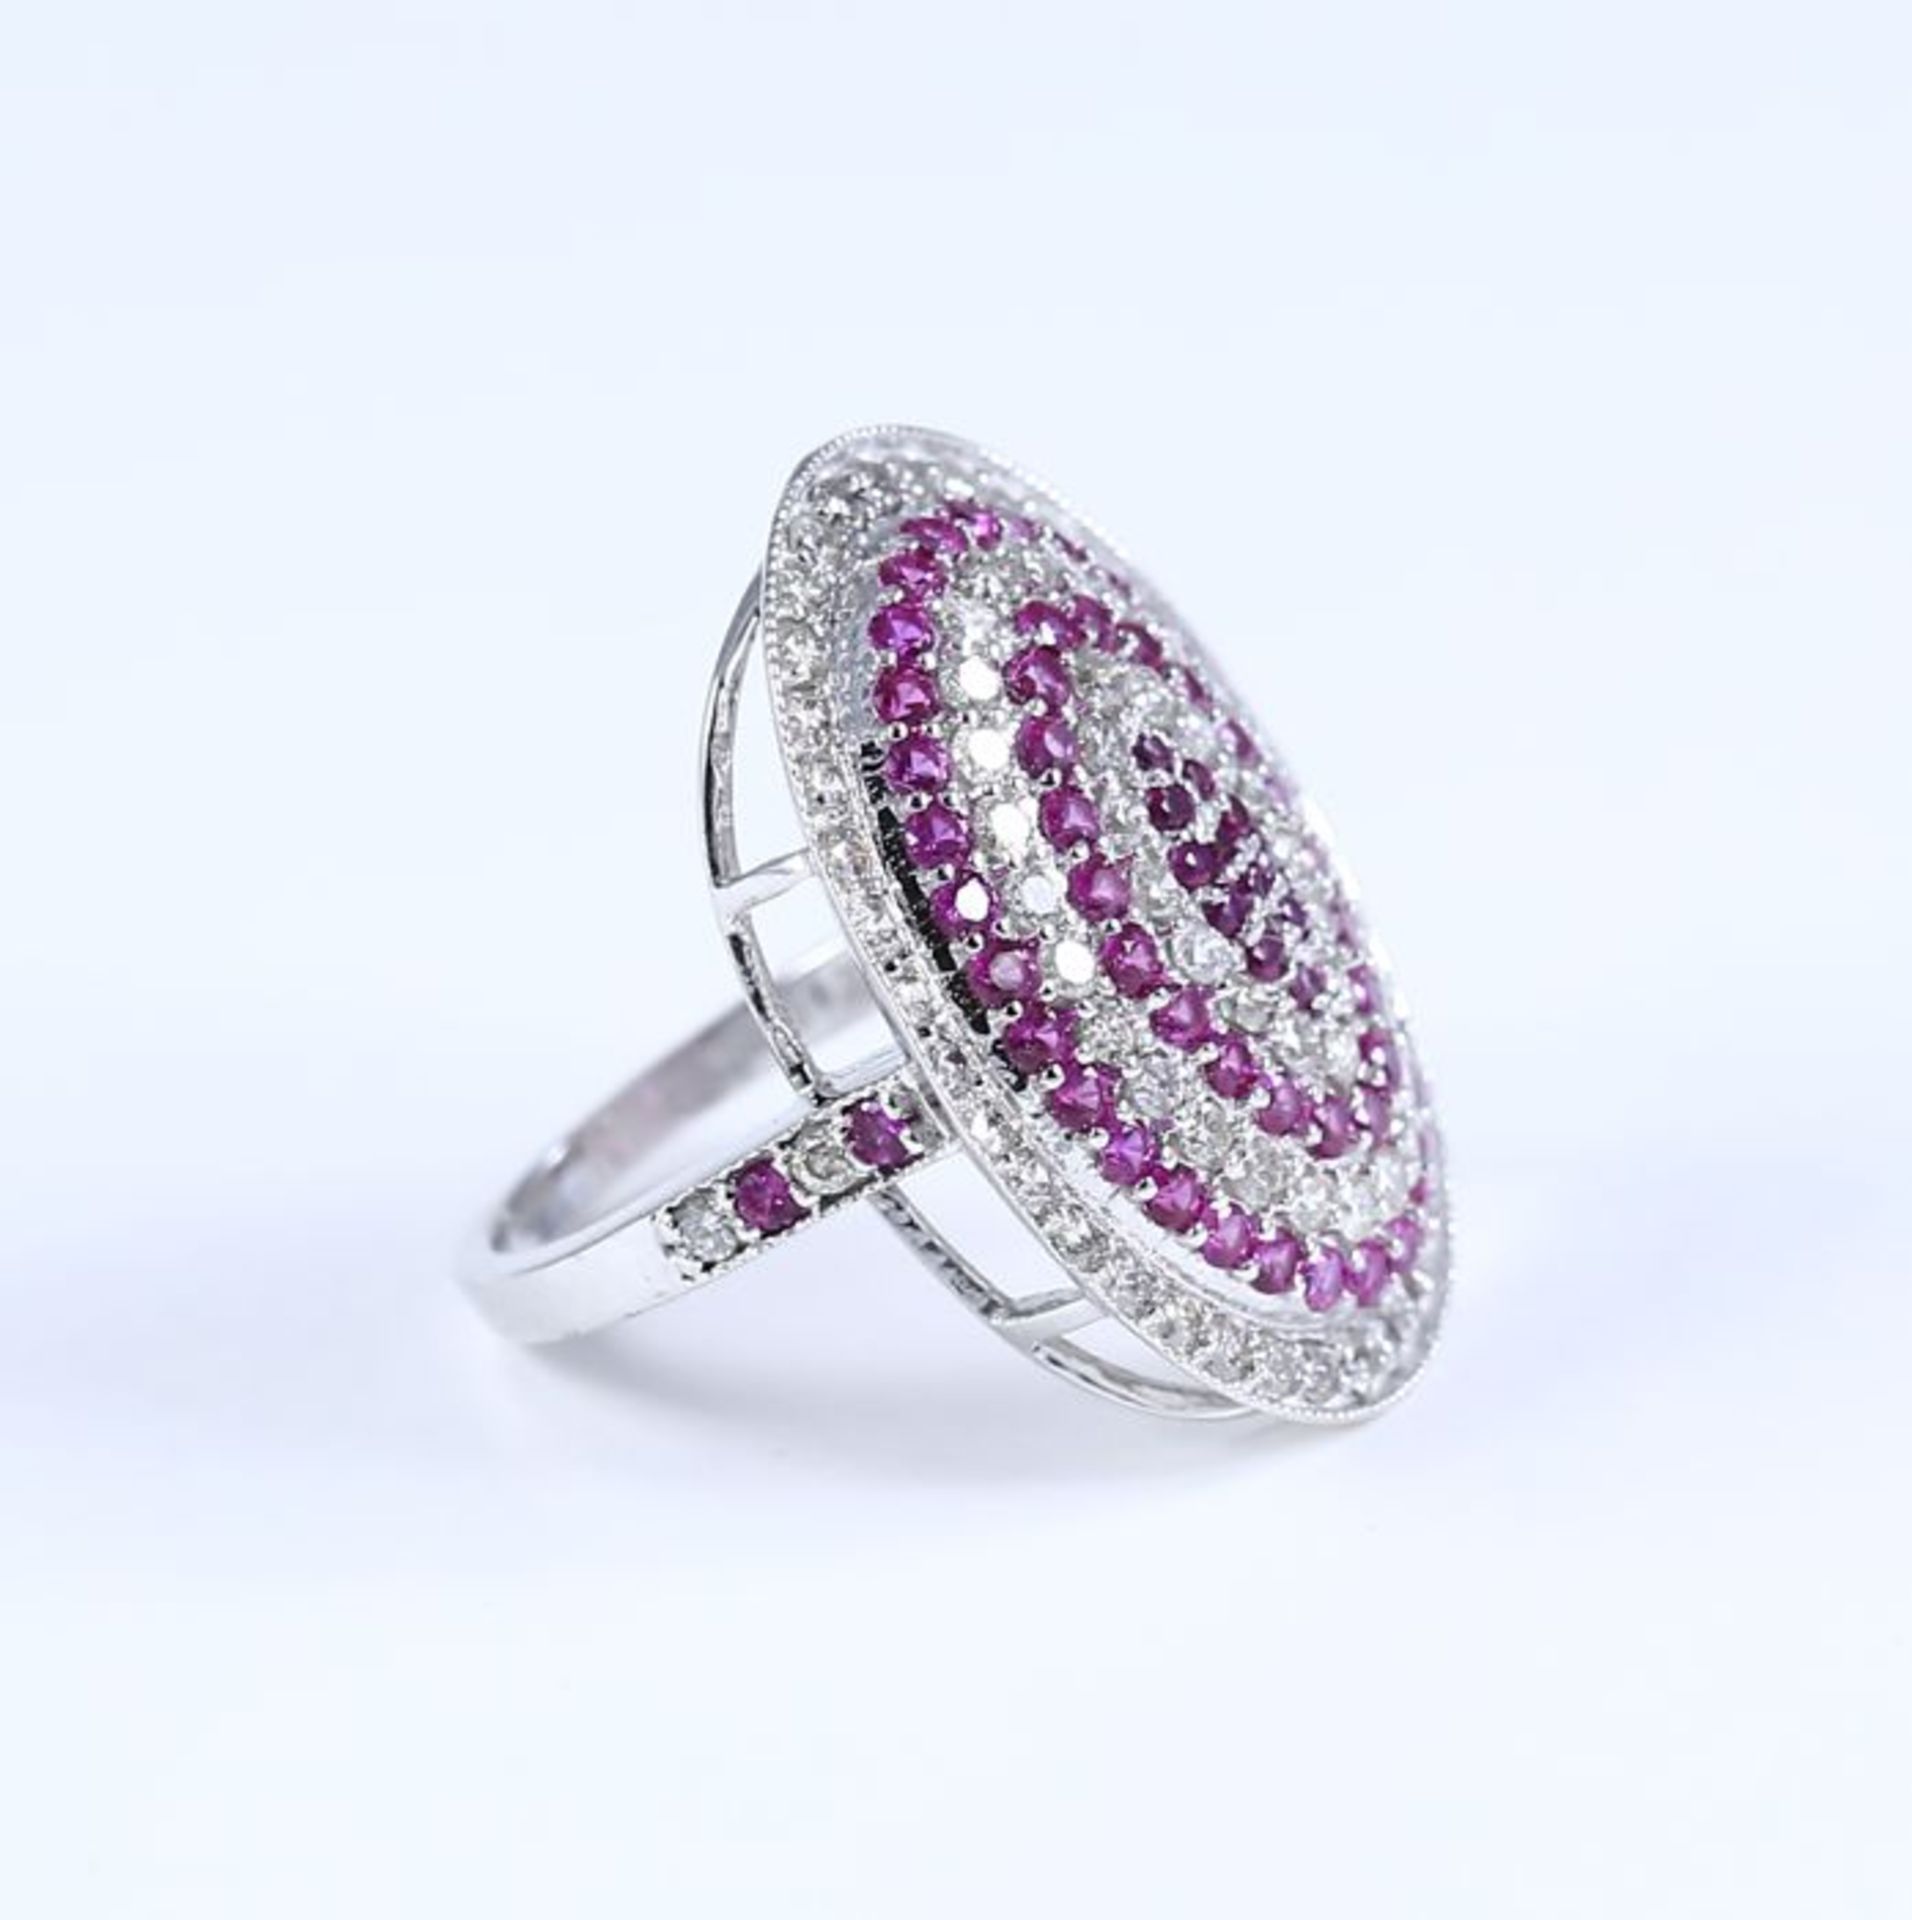 14 K / 585 Very Exclusive White Gold Diamond and Ruby Ring - Image 7 of 10